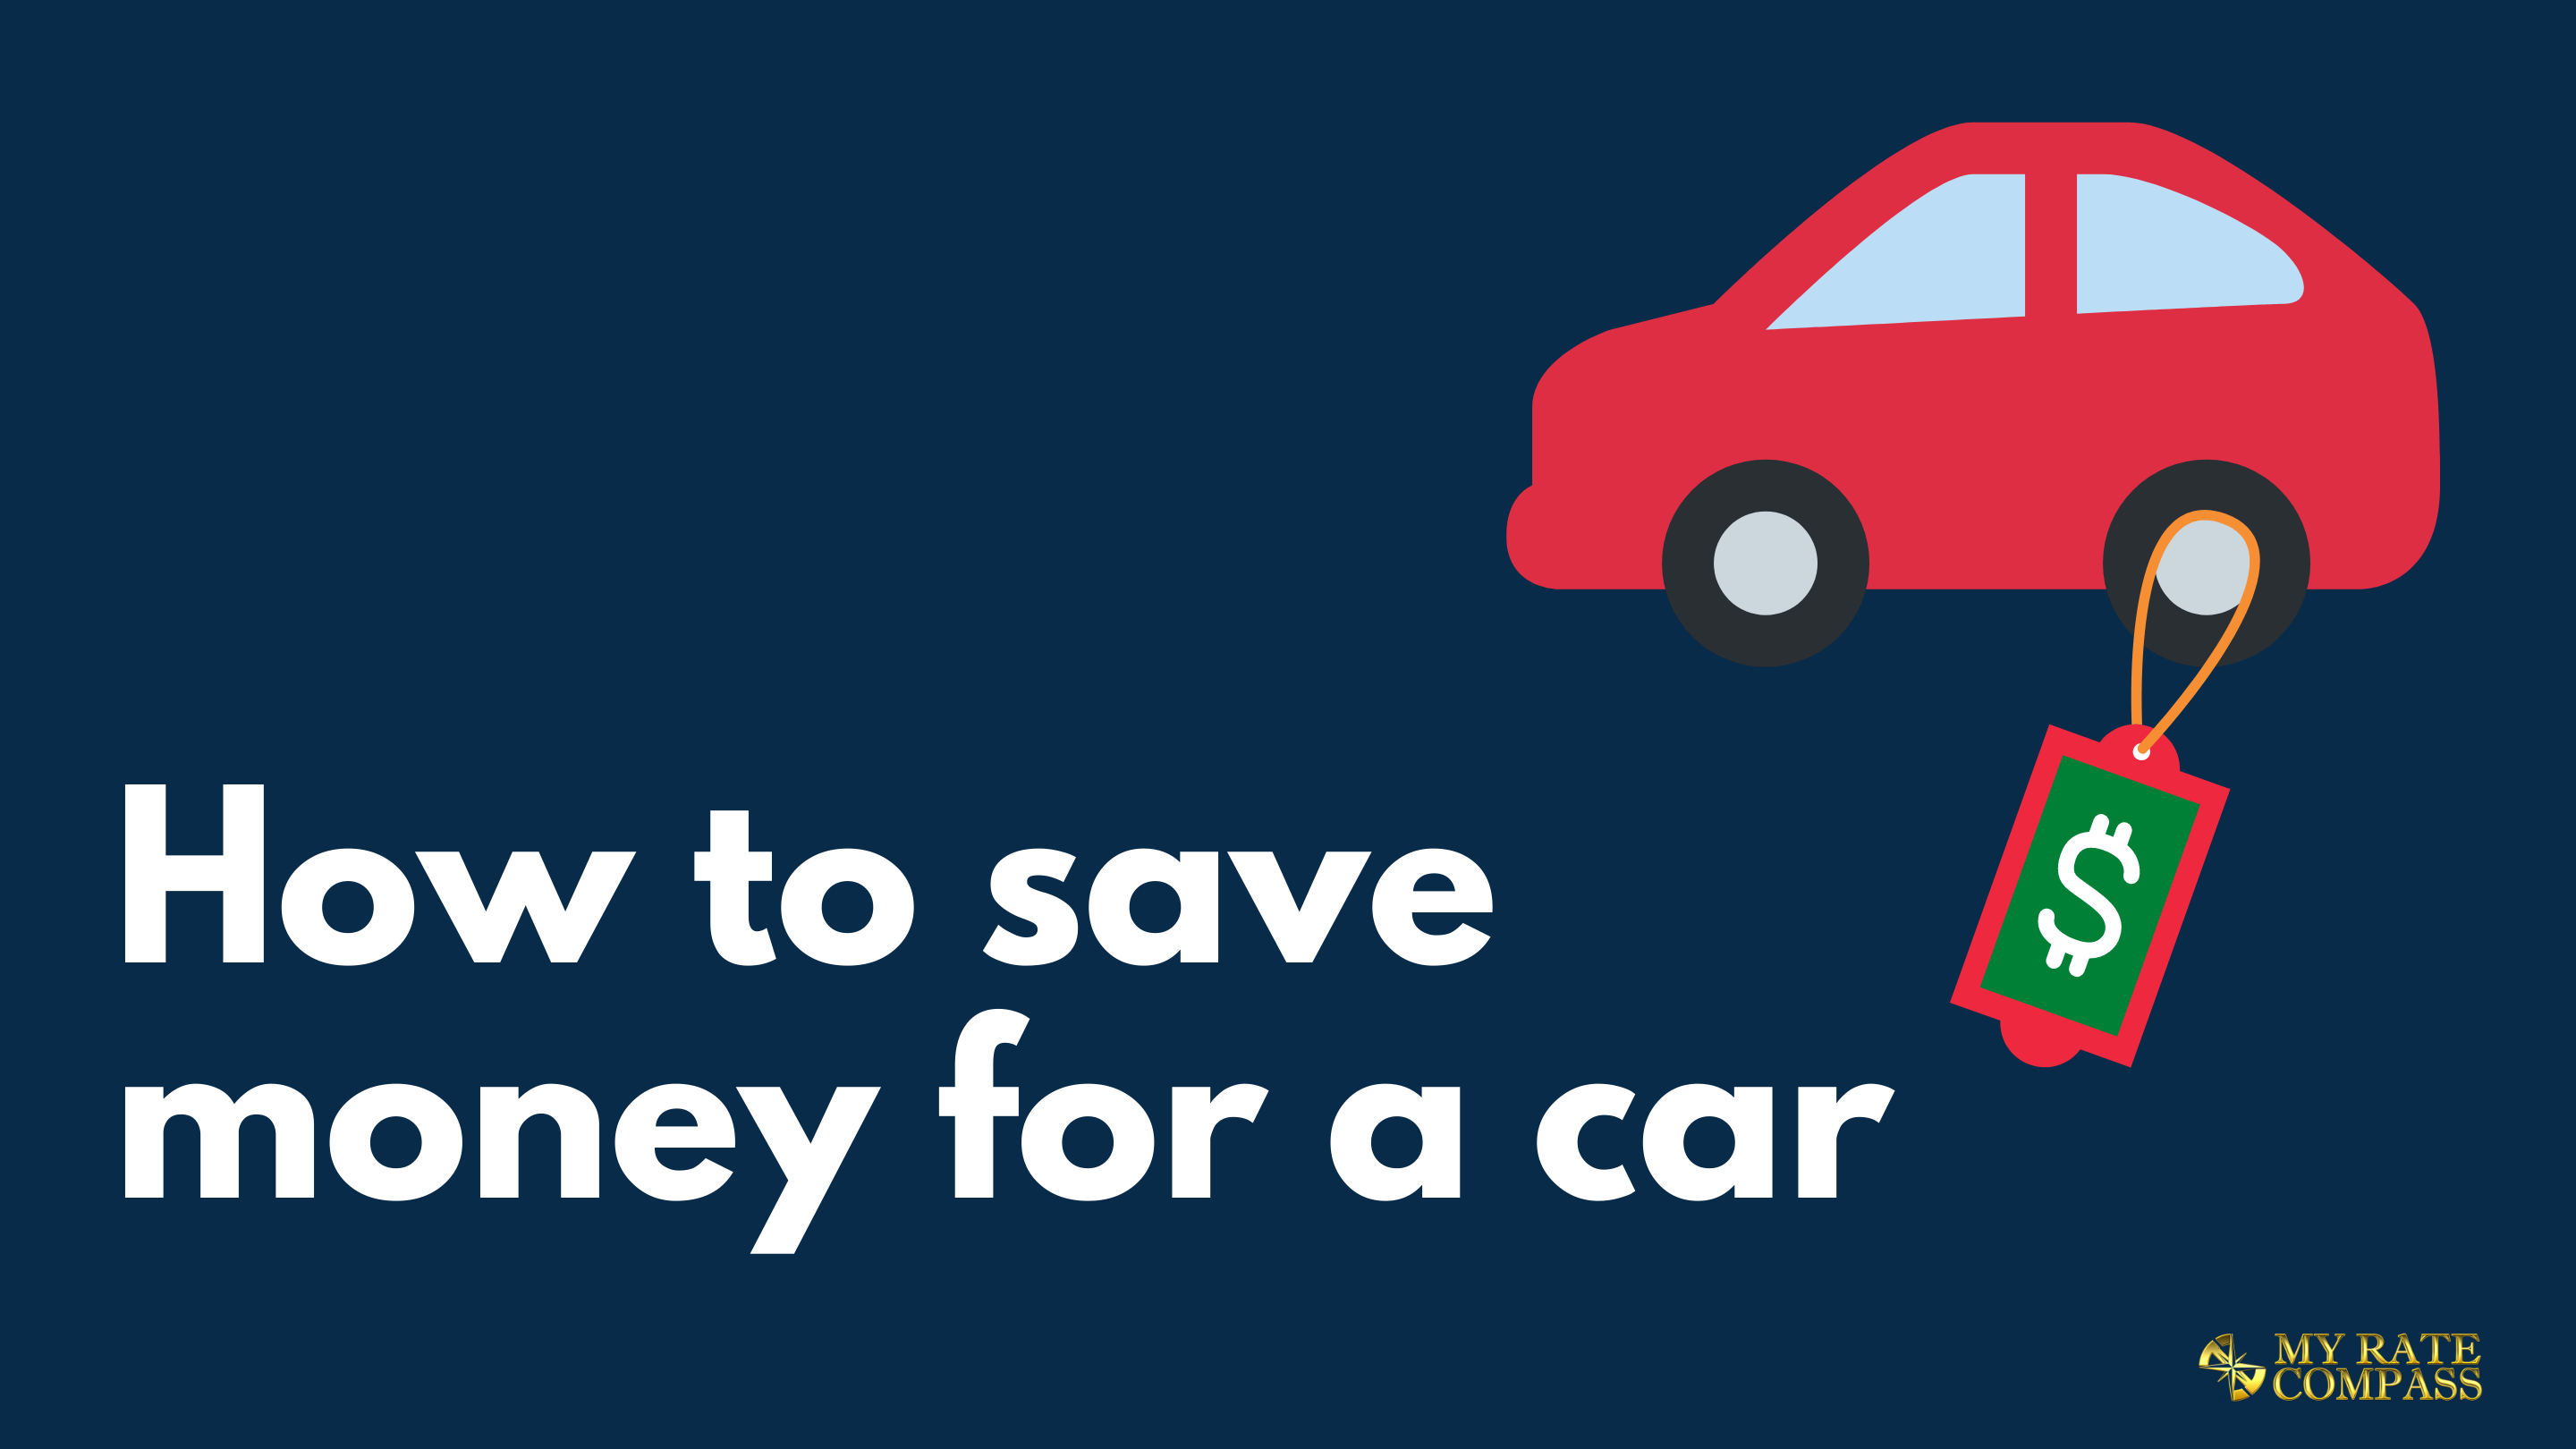 How To Save For A Car In A Year / Learn To Save Money On Car Repair In